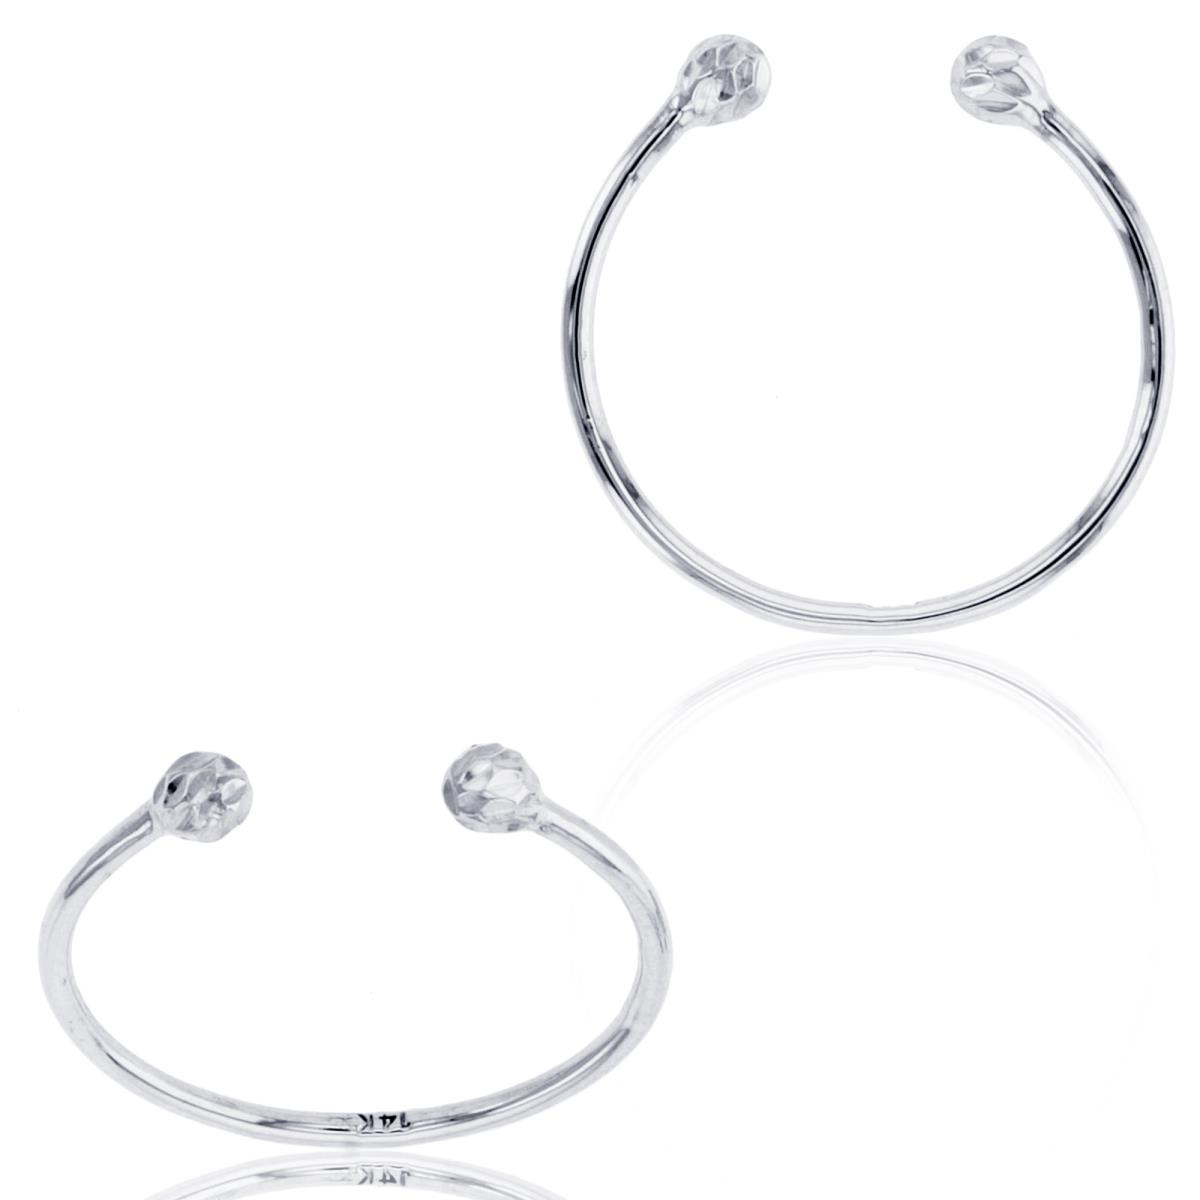 10K White Gold 3mm DC Beads on Adjustable Wire Ring